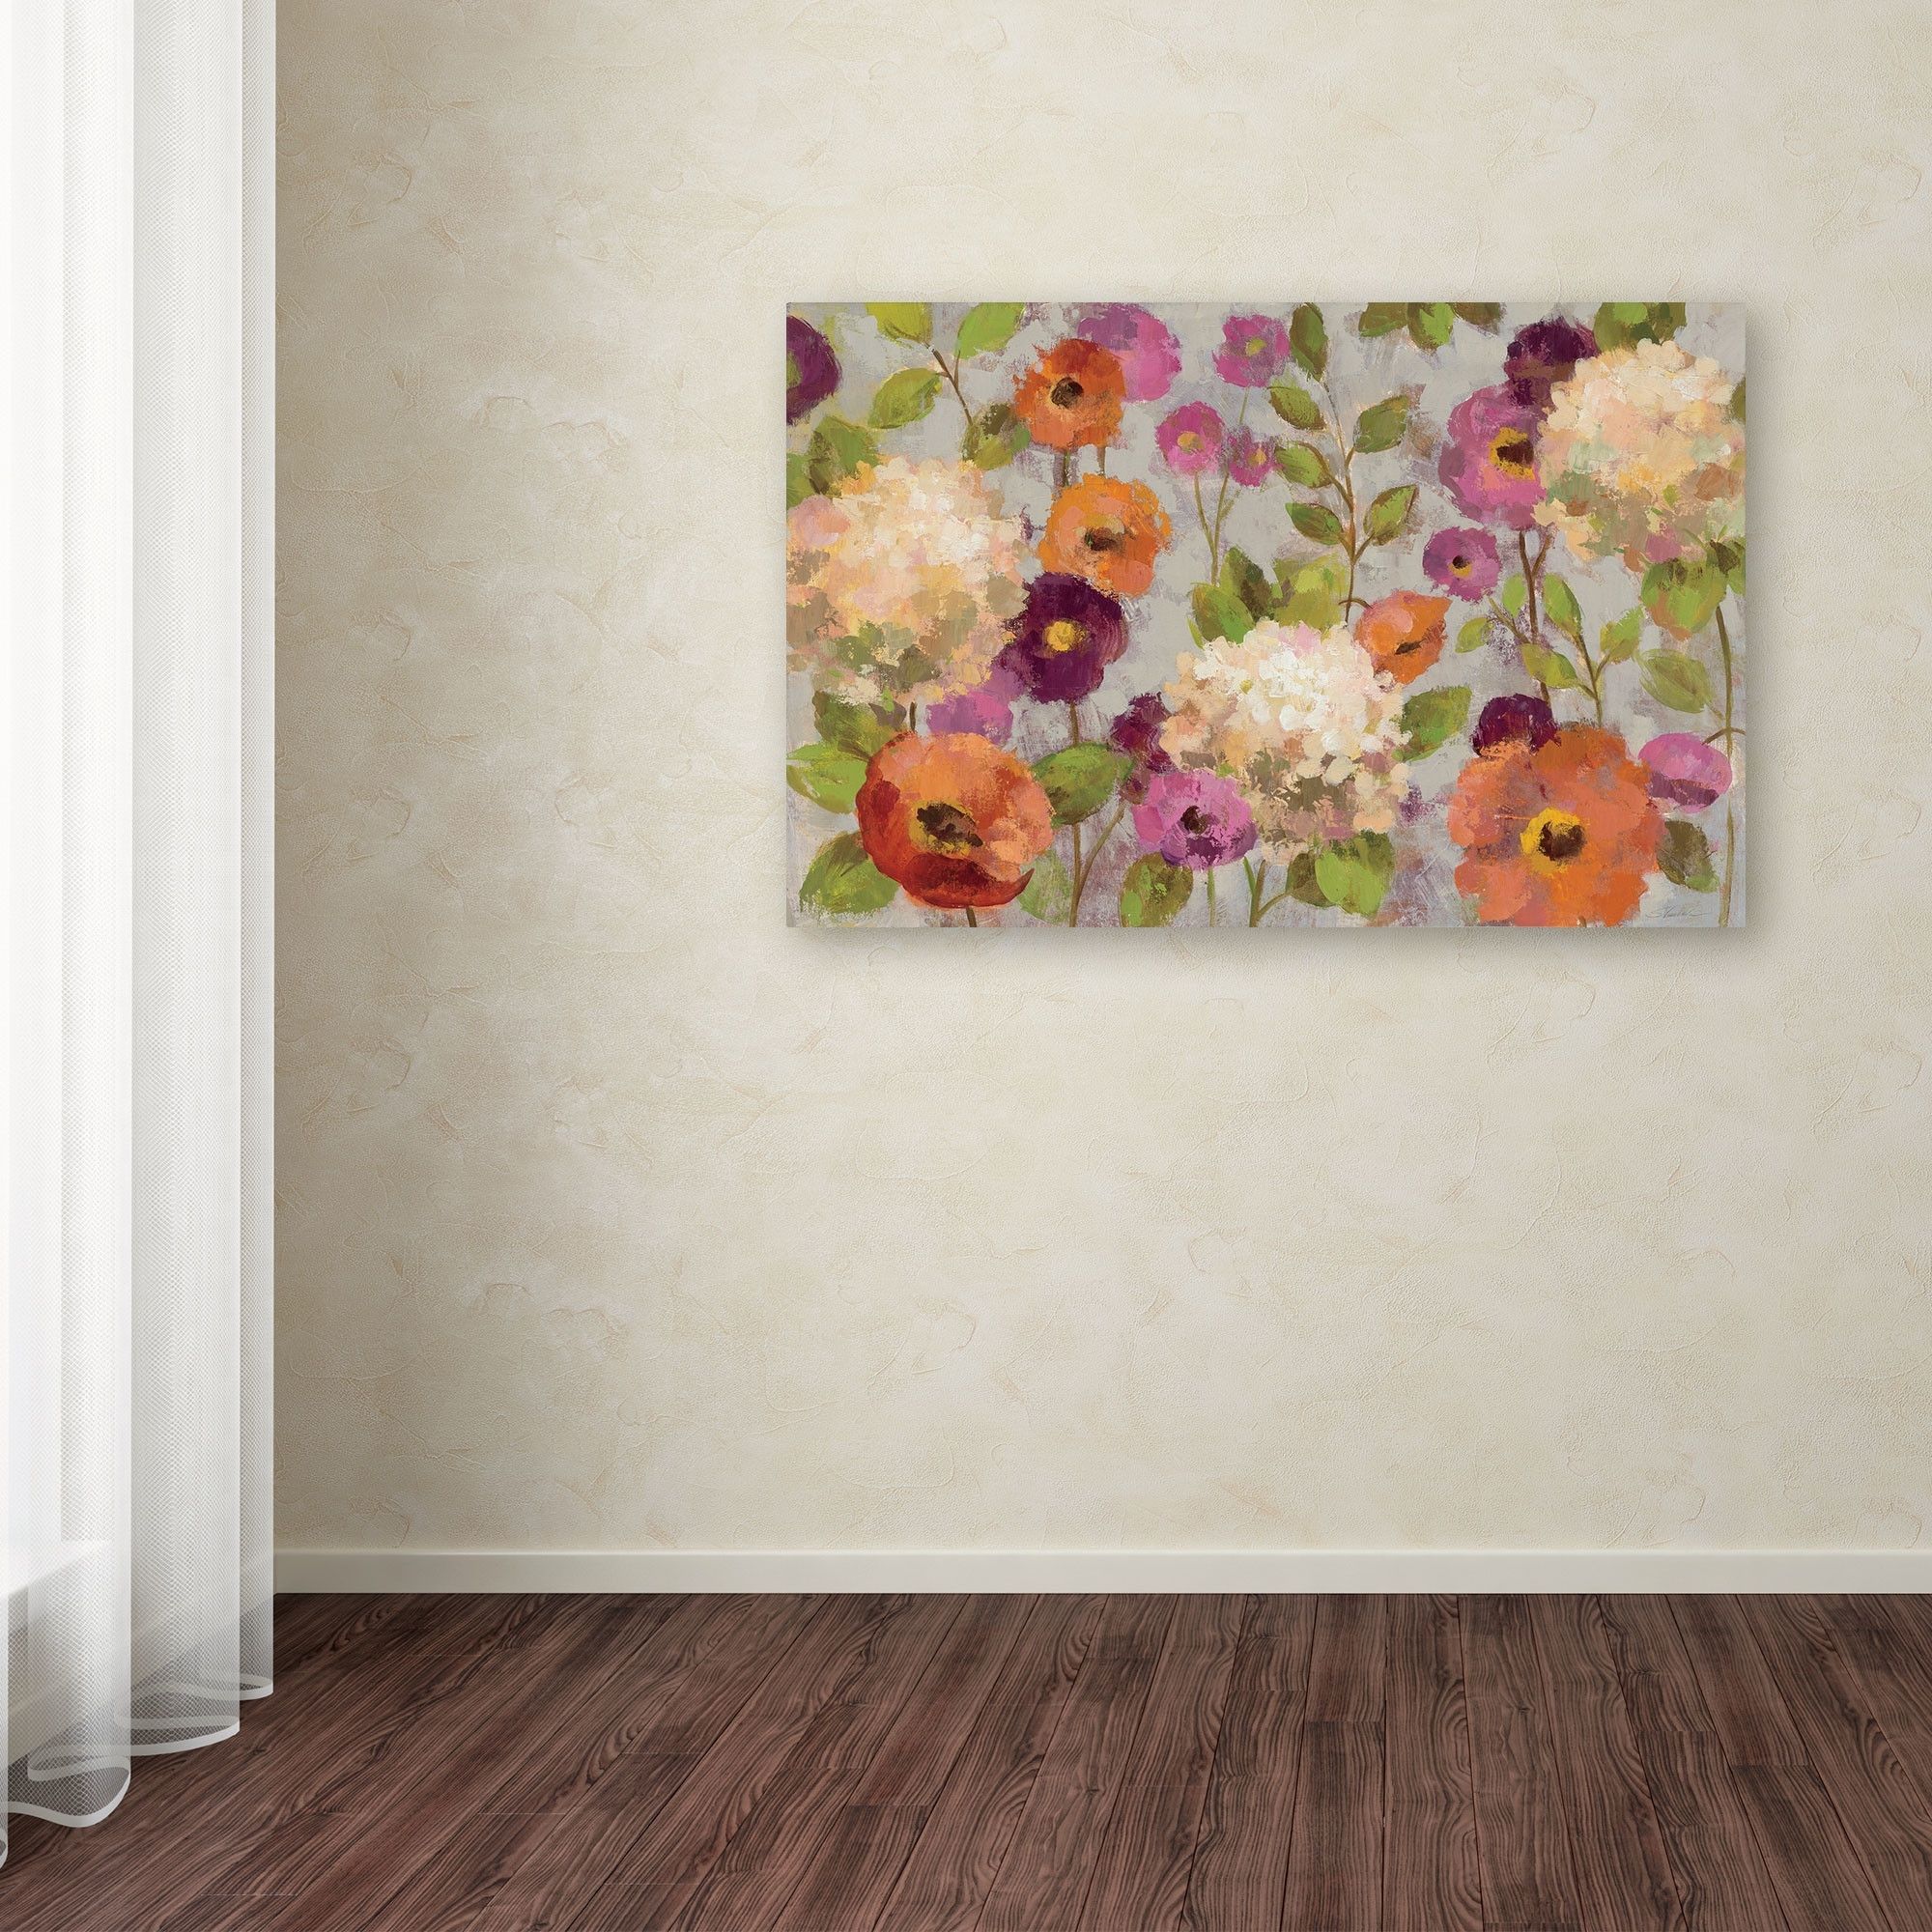 Canvas Art From Wayfair – Wild Apple Intended For Most Up To Date Canvas Wall Art At Wayfair (View 1 of 15)